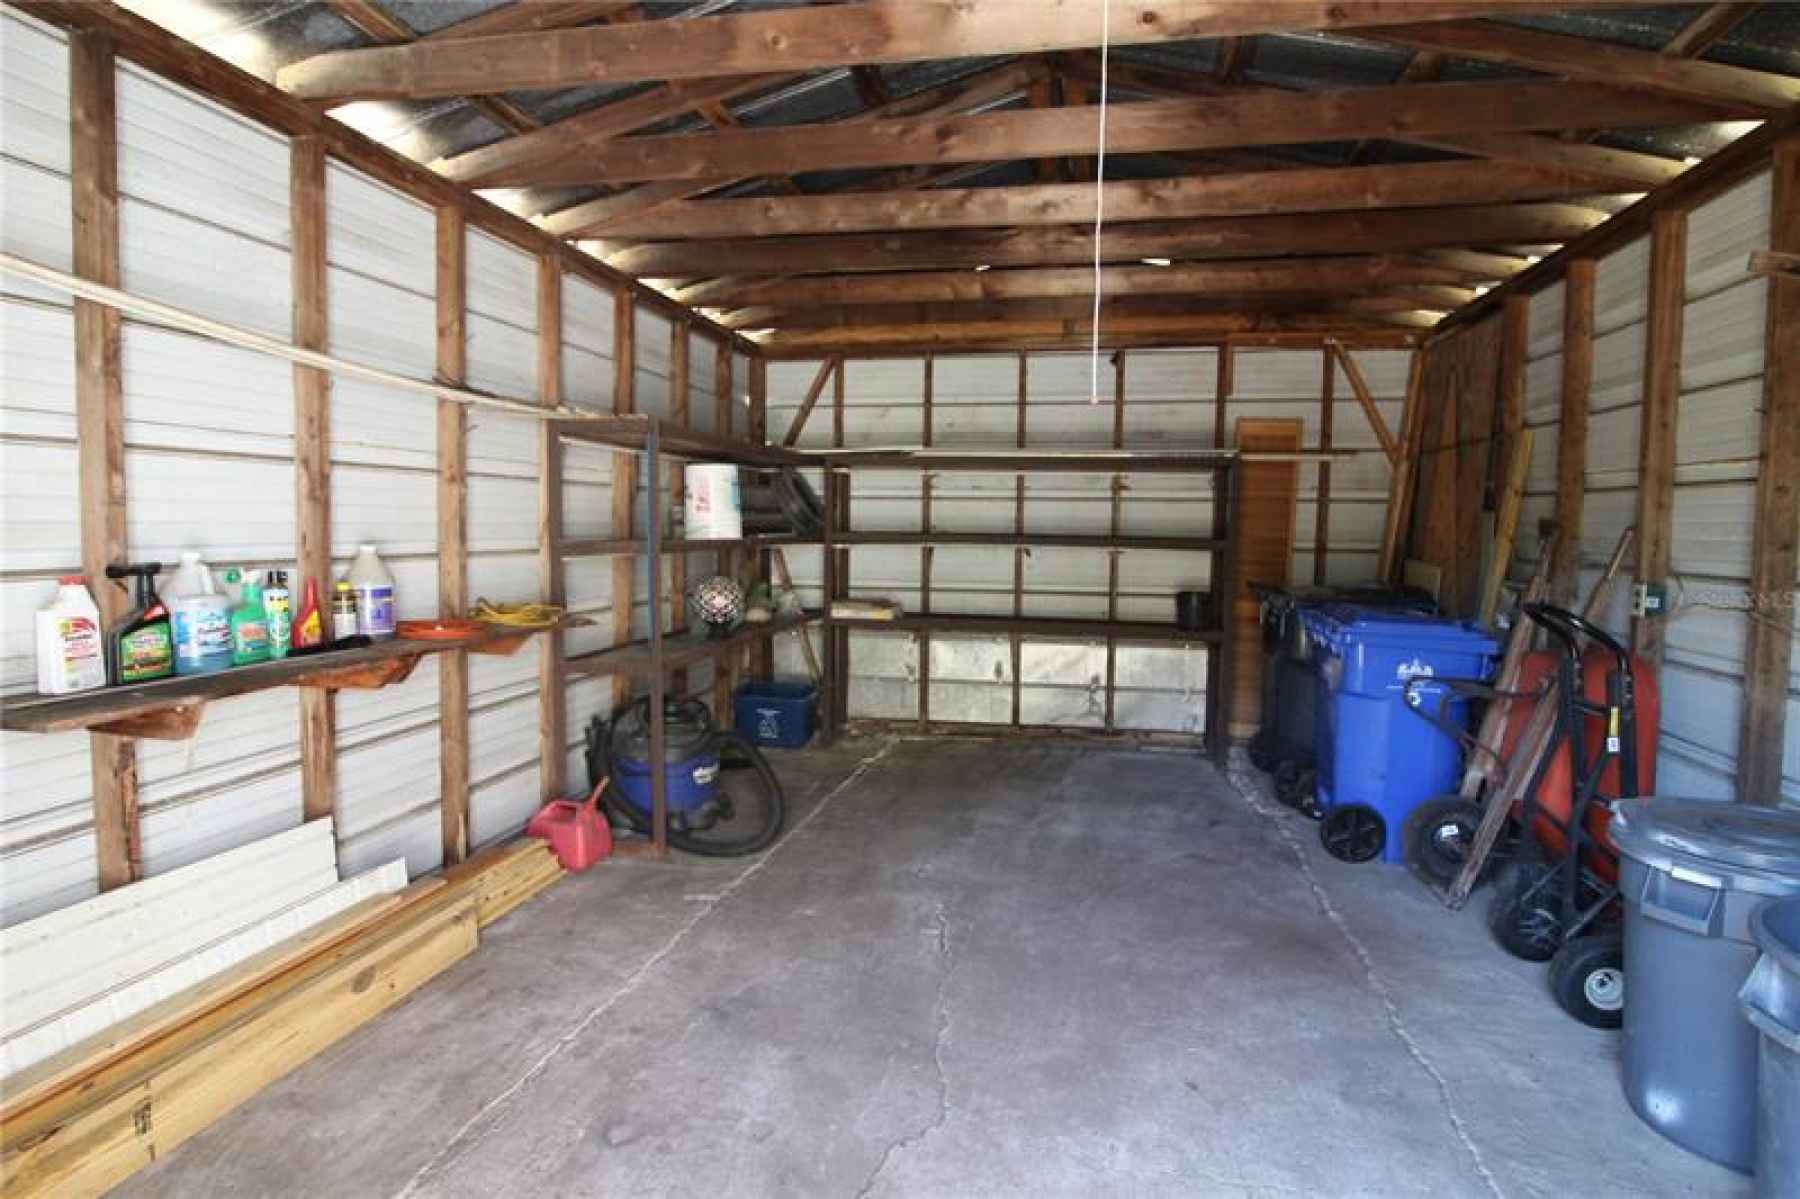 Garage has electric and a metal roof